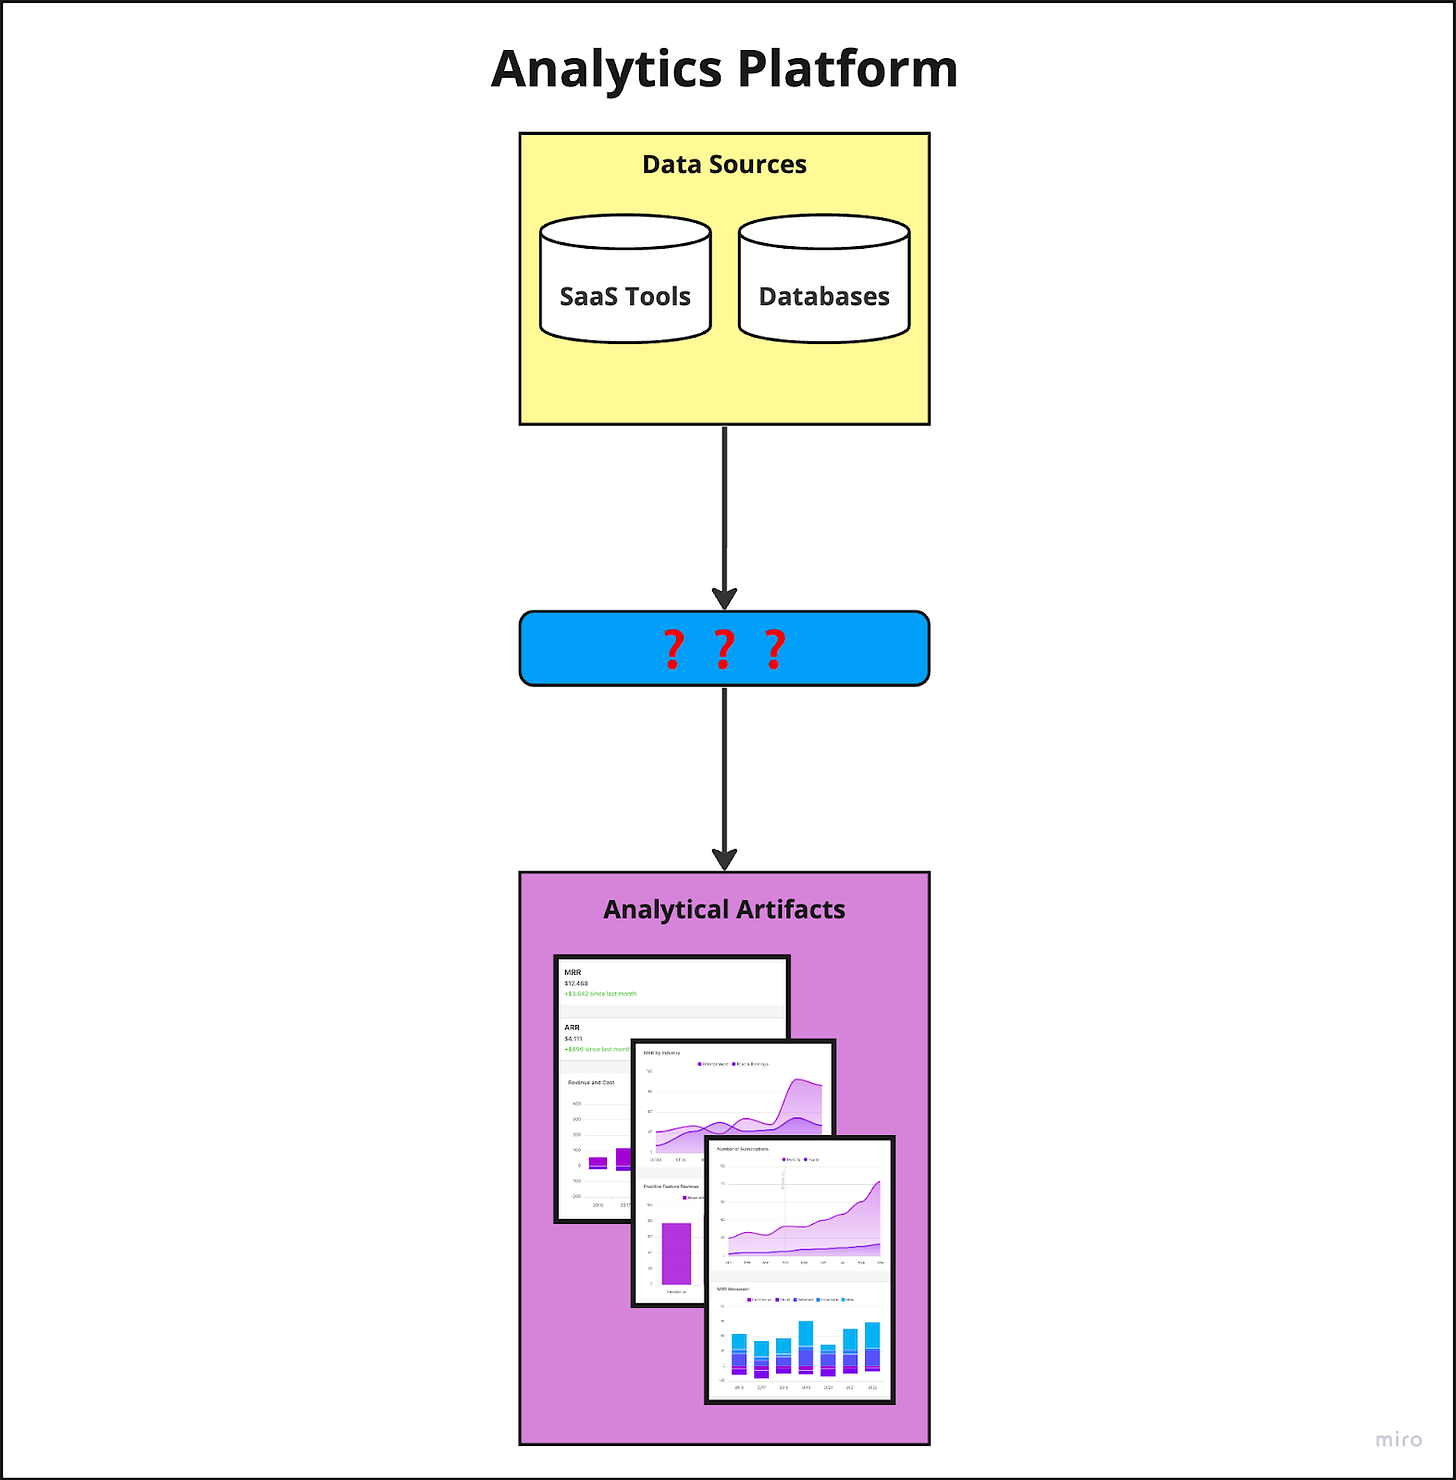 A diagram with the text 'Analytics Platform' on top and three boxes: At the top, one box labeled 'Data sources', which contains icons for 'SaaS tools' and 'Databases; from there, an arrow points downward to the second box filled with question marks; and from there an arrow points downward to a third box labelled '4. Analytics artefacts with images of graphs and charts.